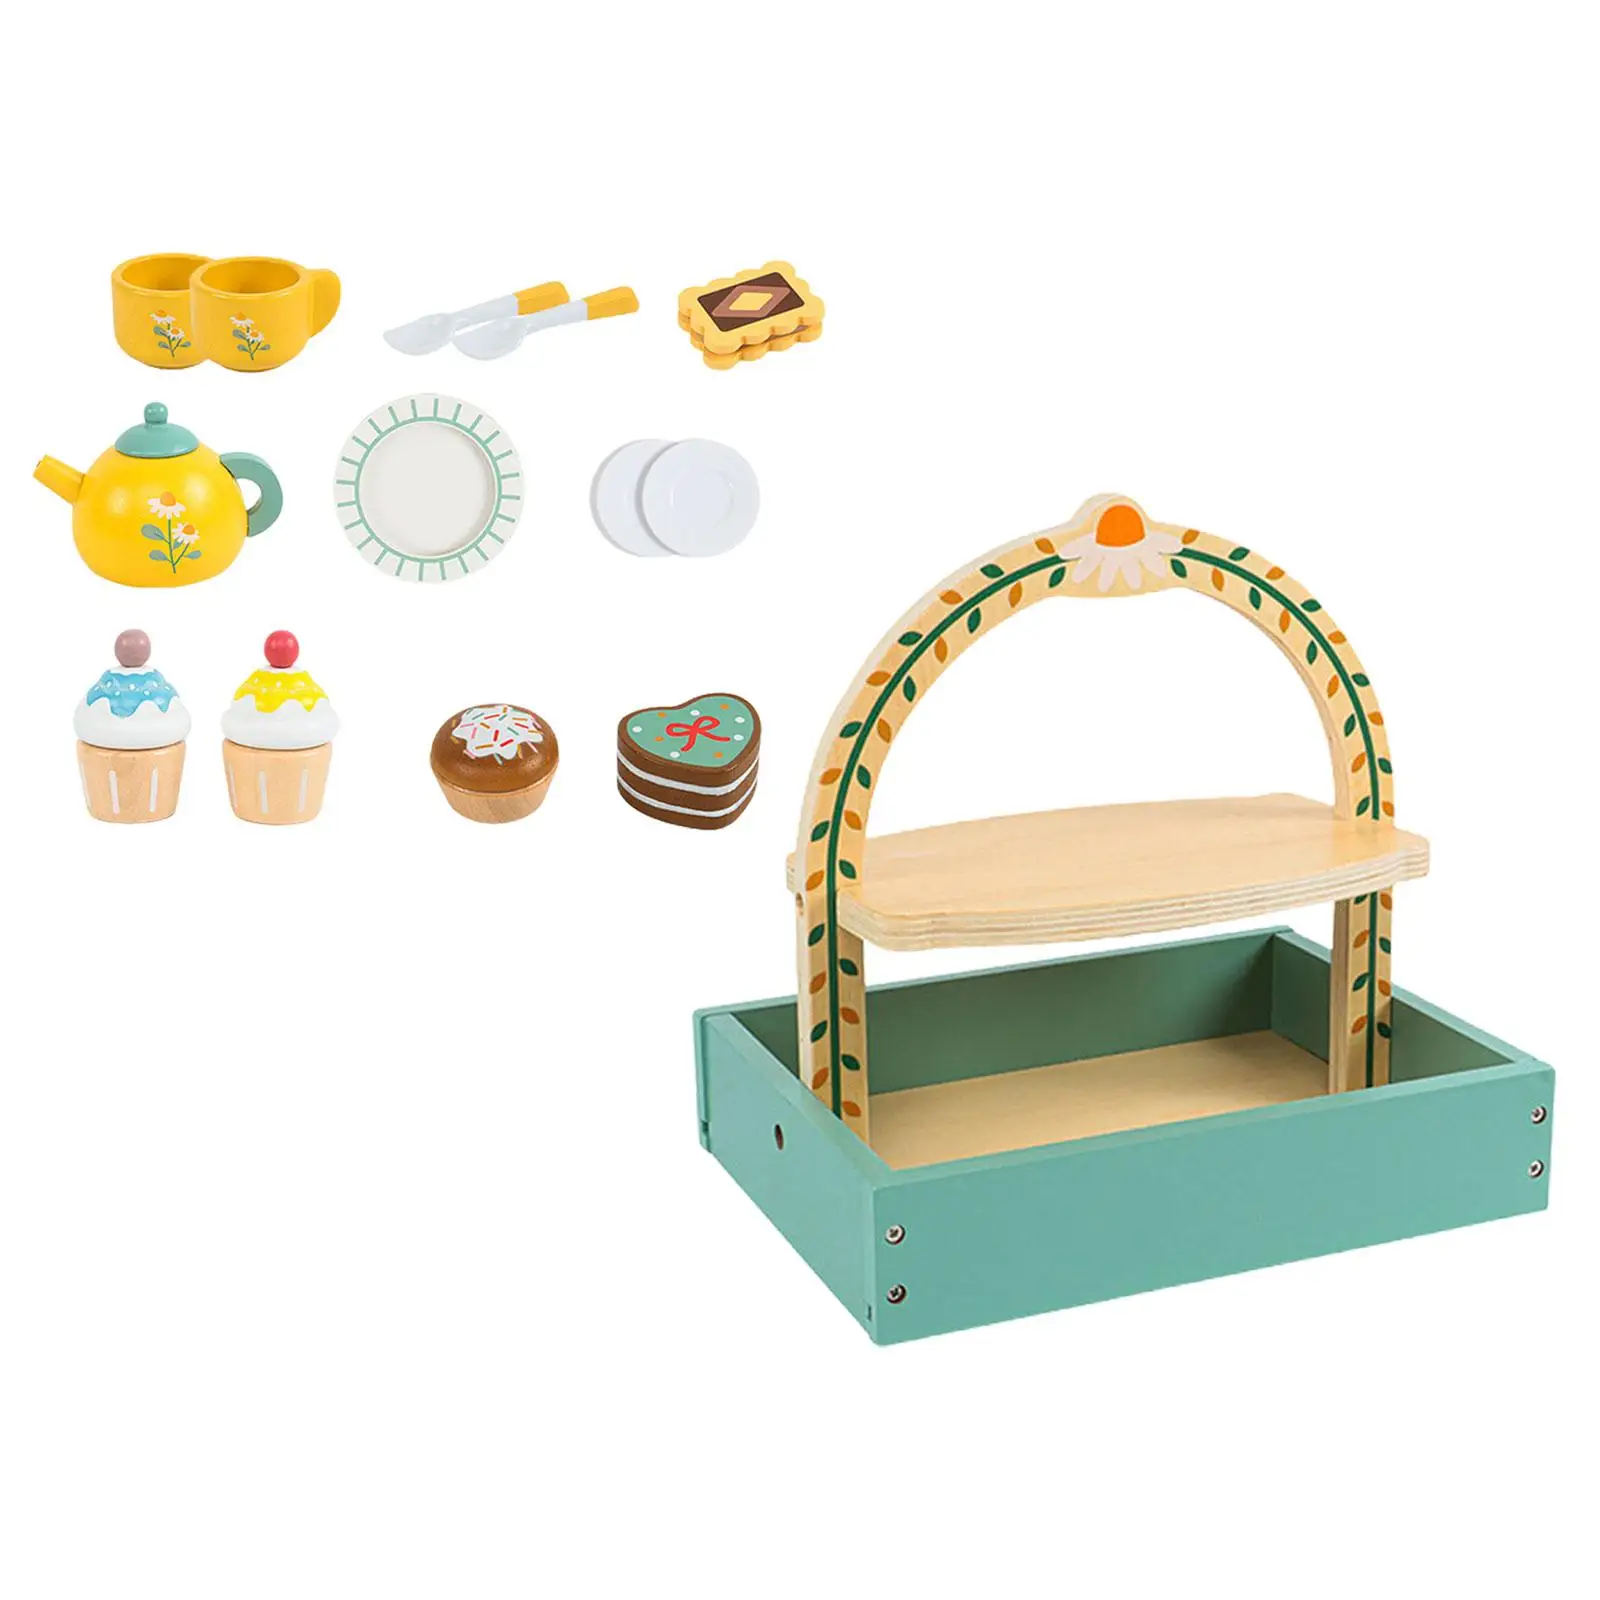 Afternoon Tea Set Educational Learning Game Simulation Toy Wooden Toy for Children Gift Age 3-6 Parent Kindergarten Child